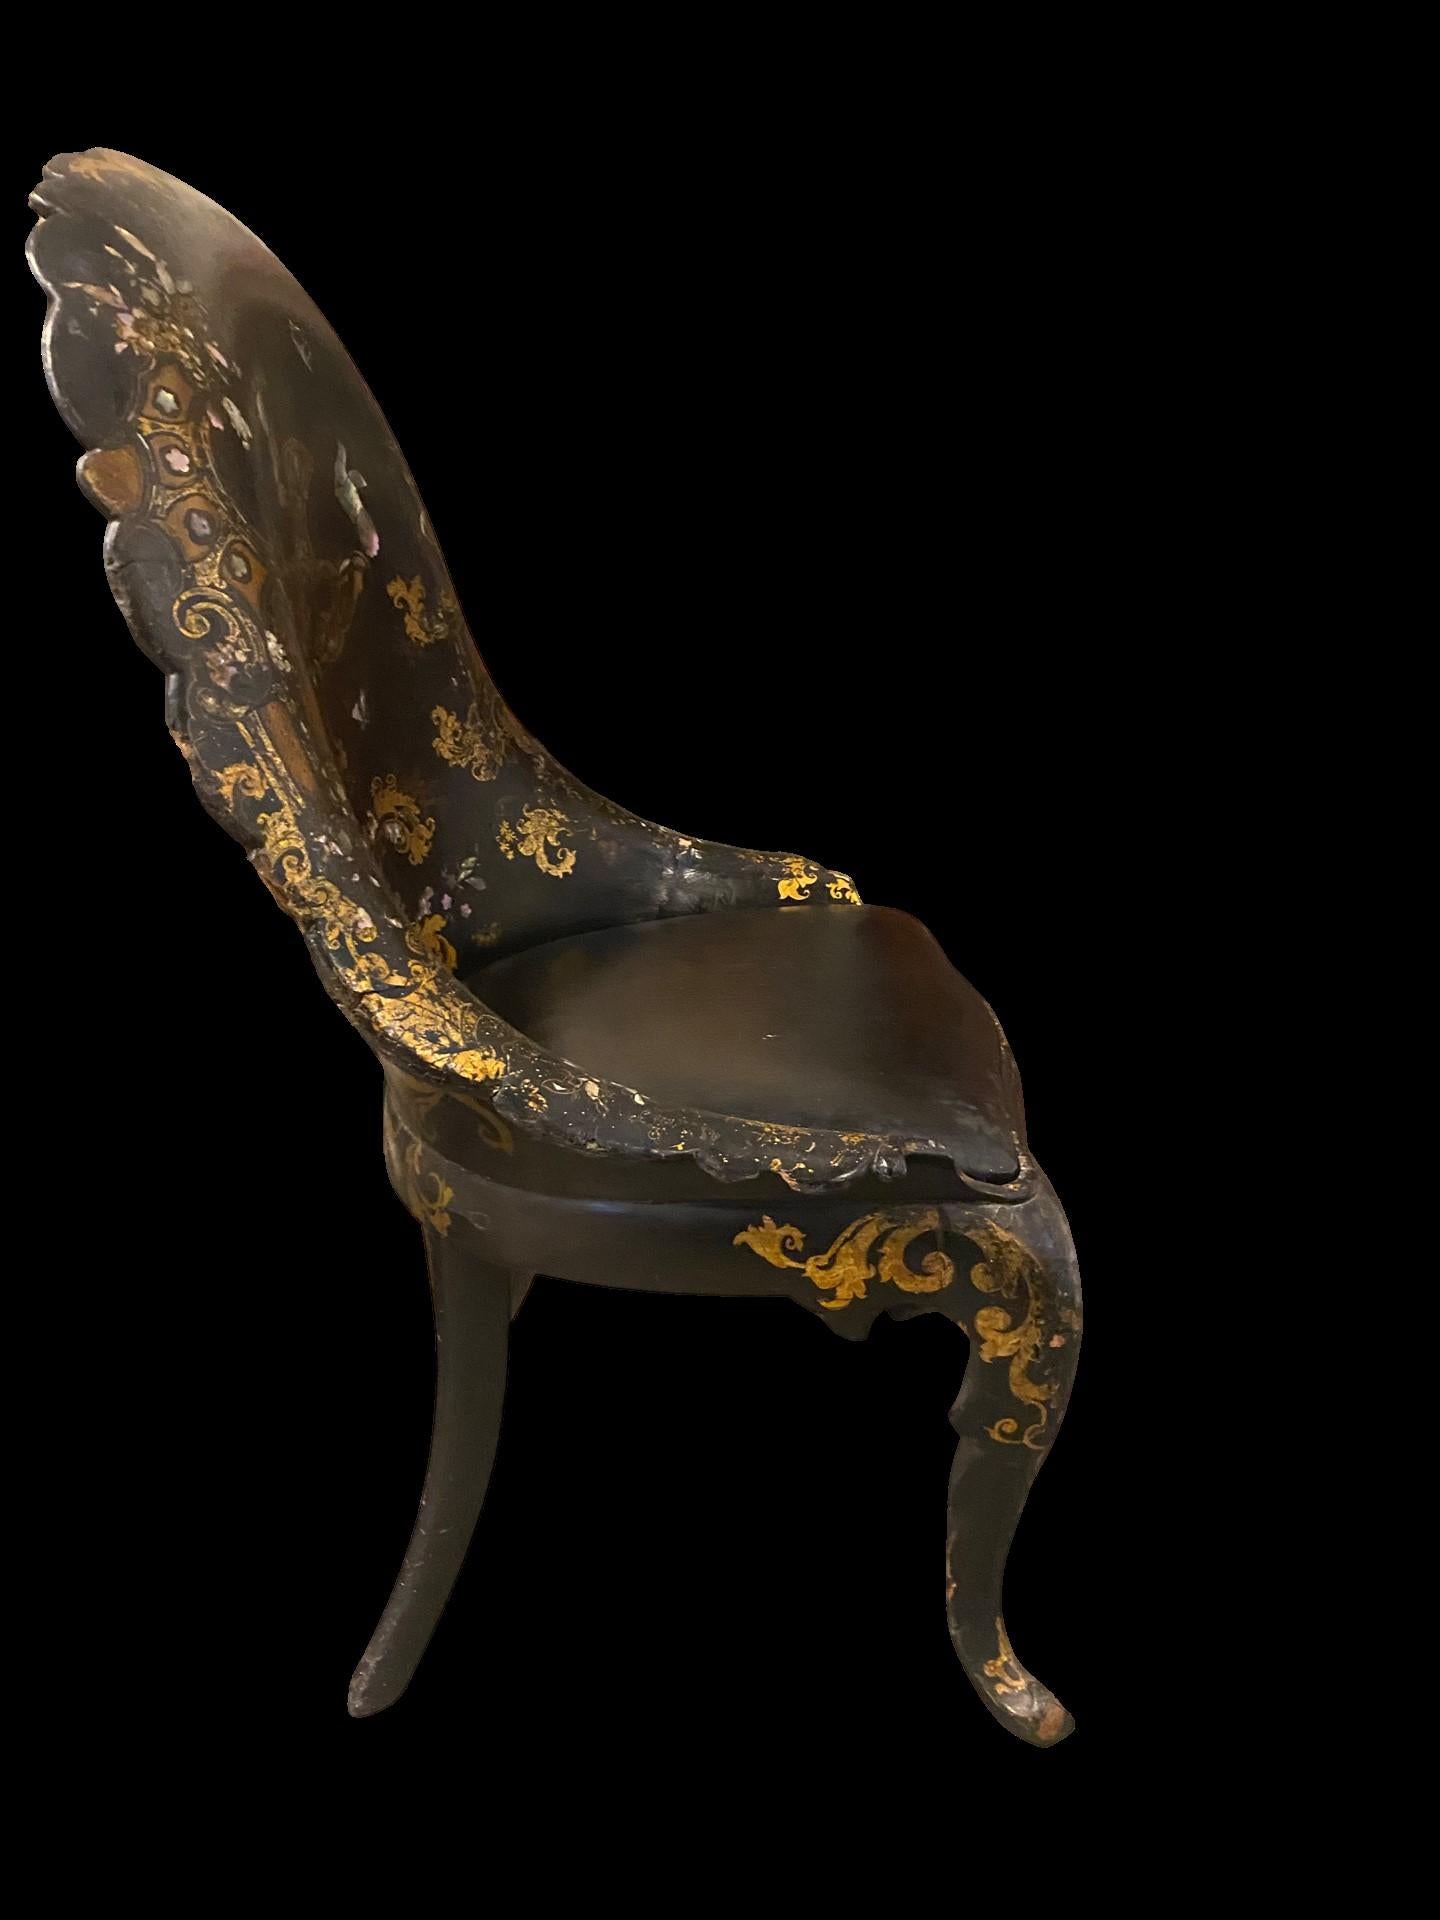 19th century Papier-mâché chair with gold leaf detail and mother of pearl inlay.